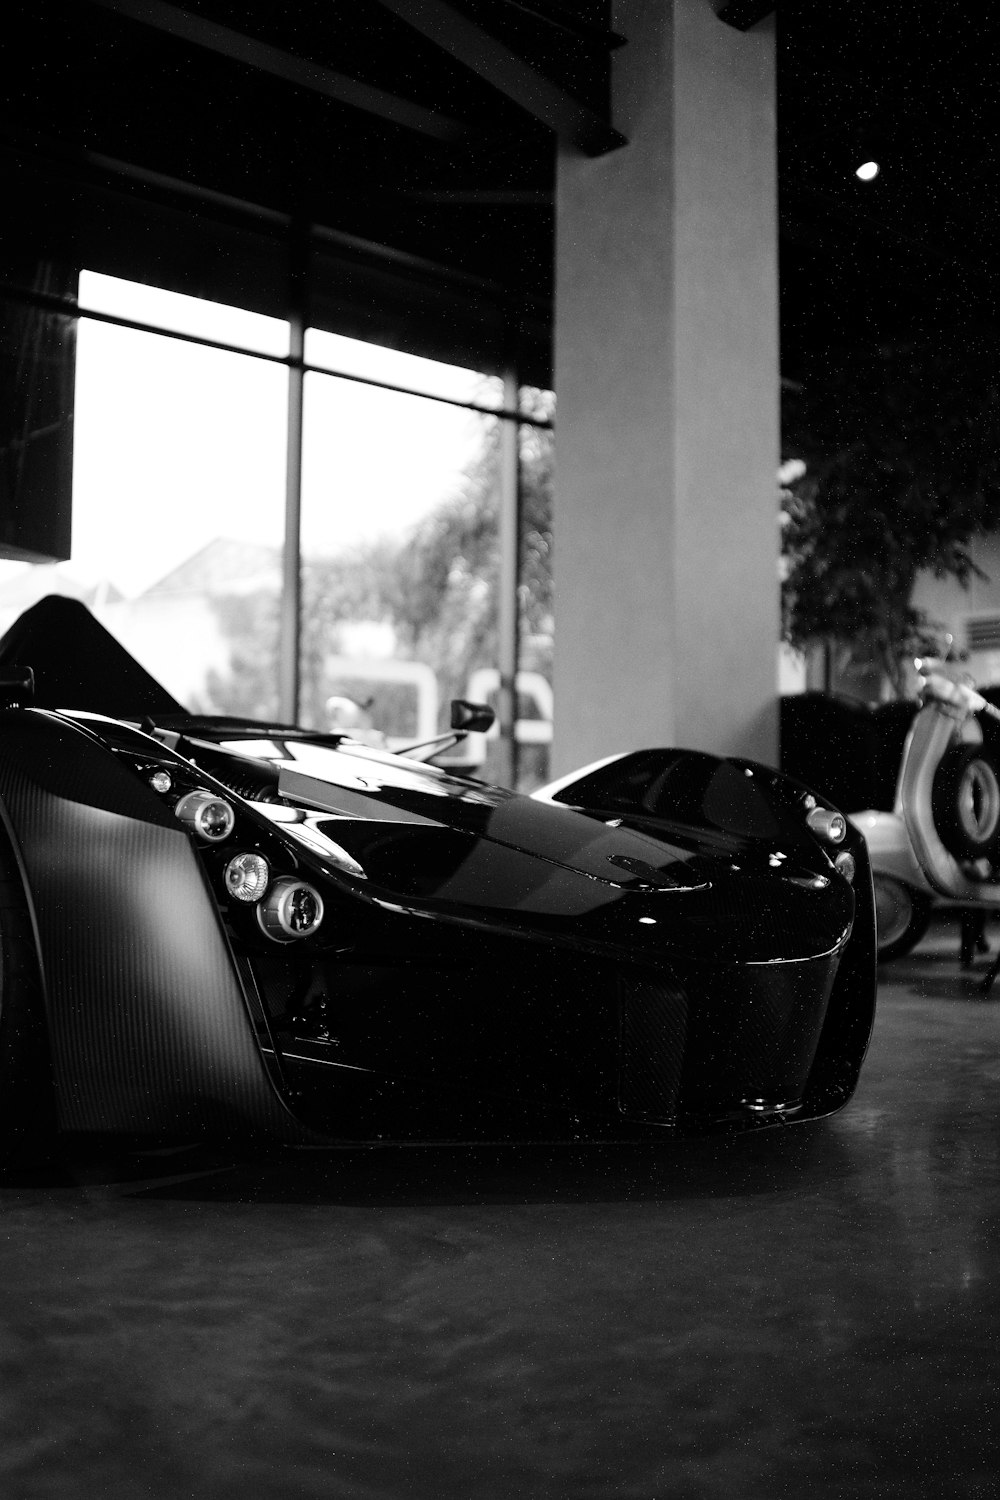 a black sports car parked in a building